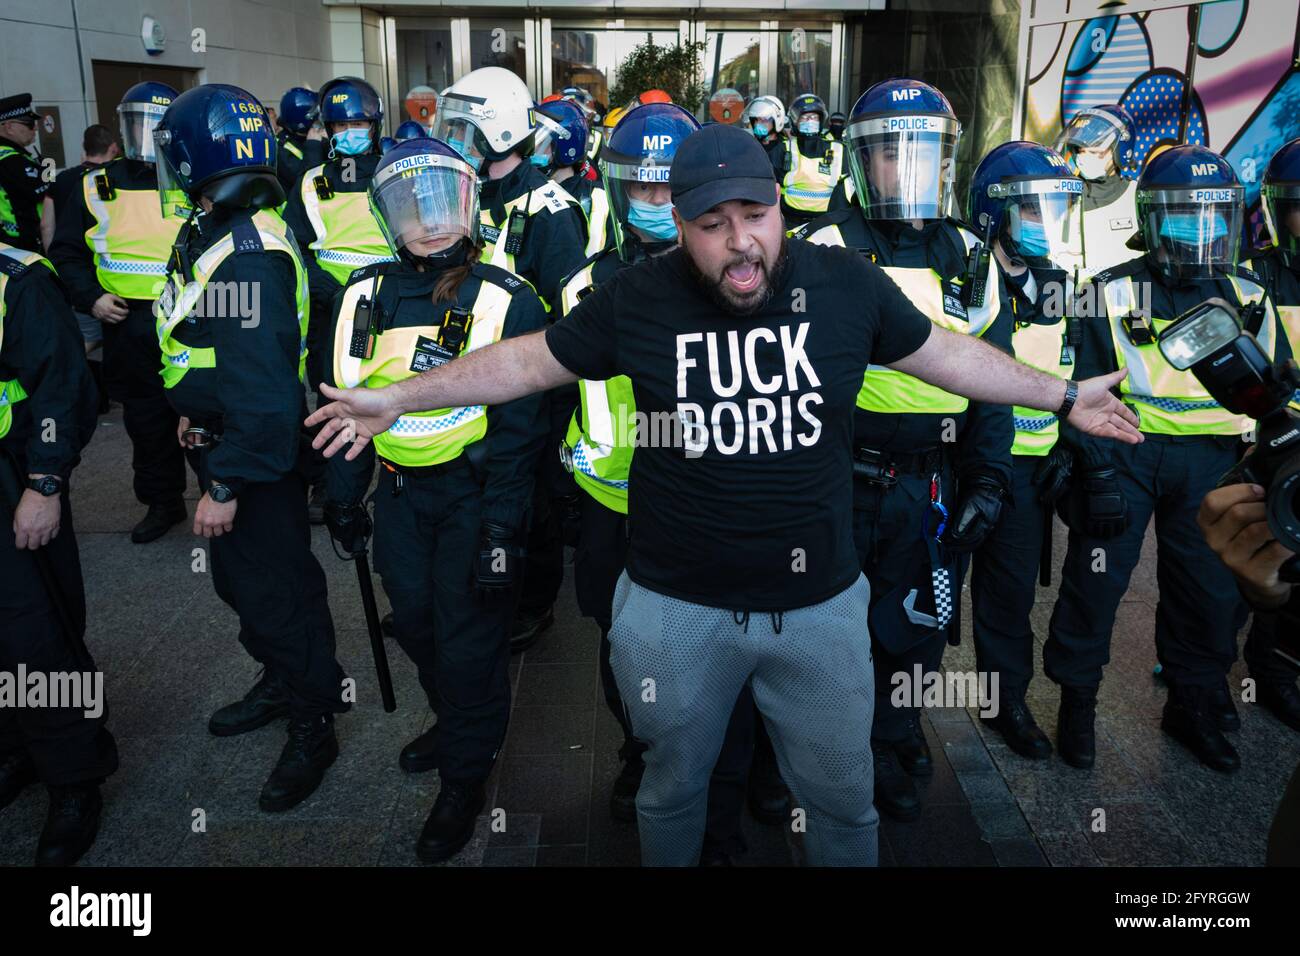 Manchester, UK. 29th May, 2021. A protester stands in front of the police as they try to hold back people from storming the Westfield shopping centre during a anti-lockdown protest. The number of people attending the protests has increased month on month since the introduction of the COVID-19 restrictions. Credit: Andy Barton/Alamy Live News Stock Photo